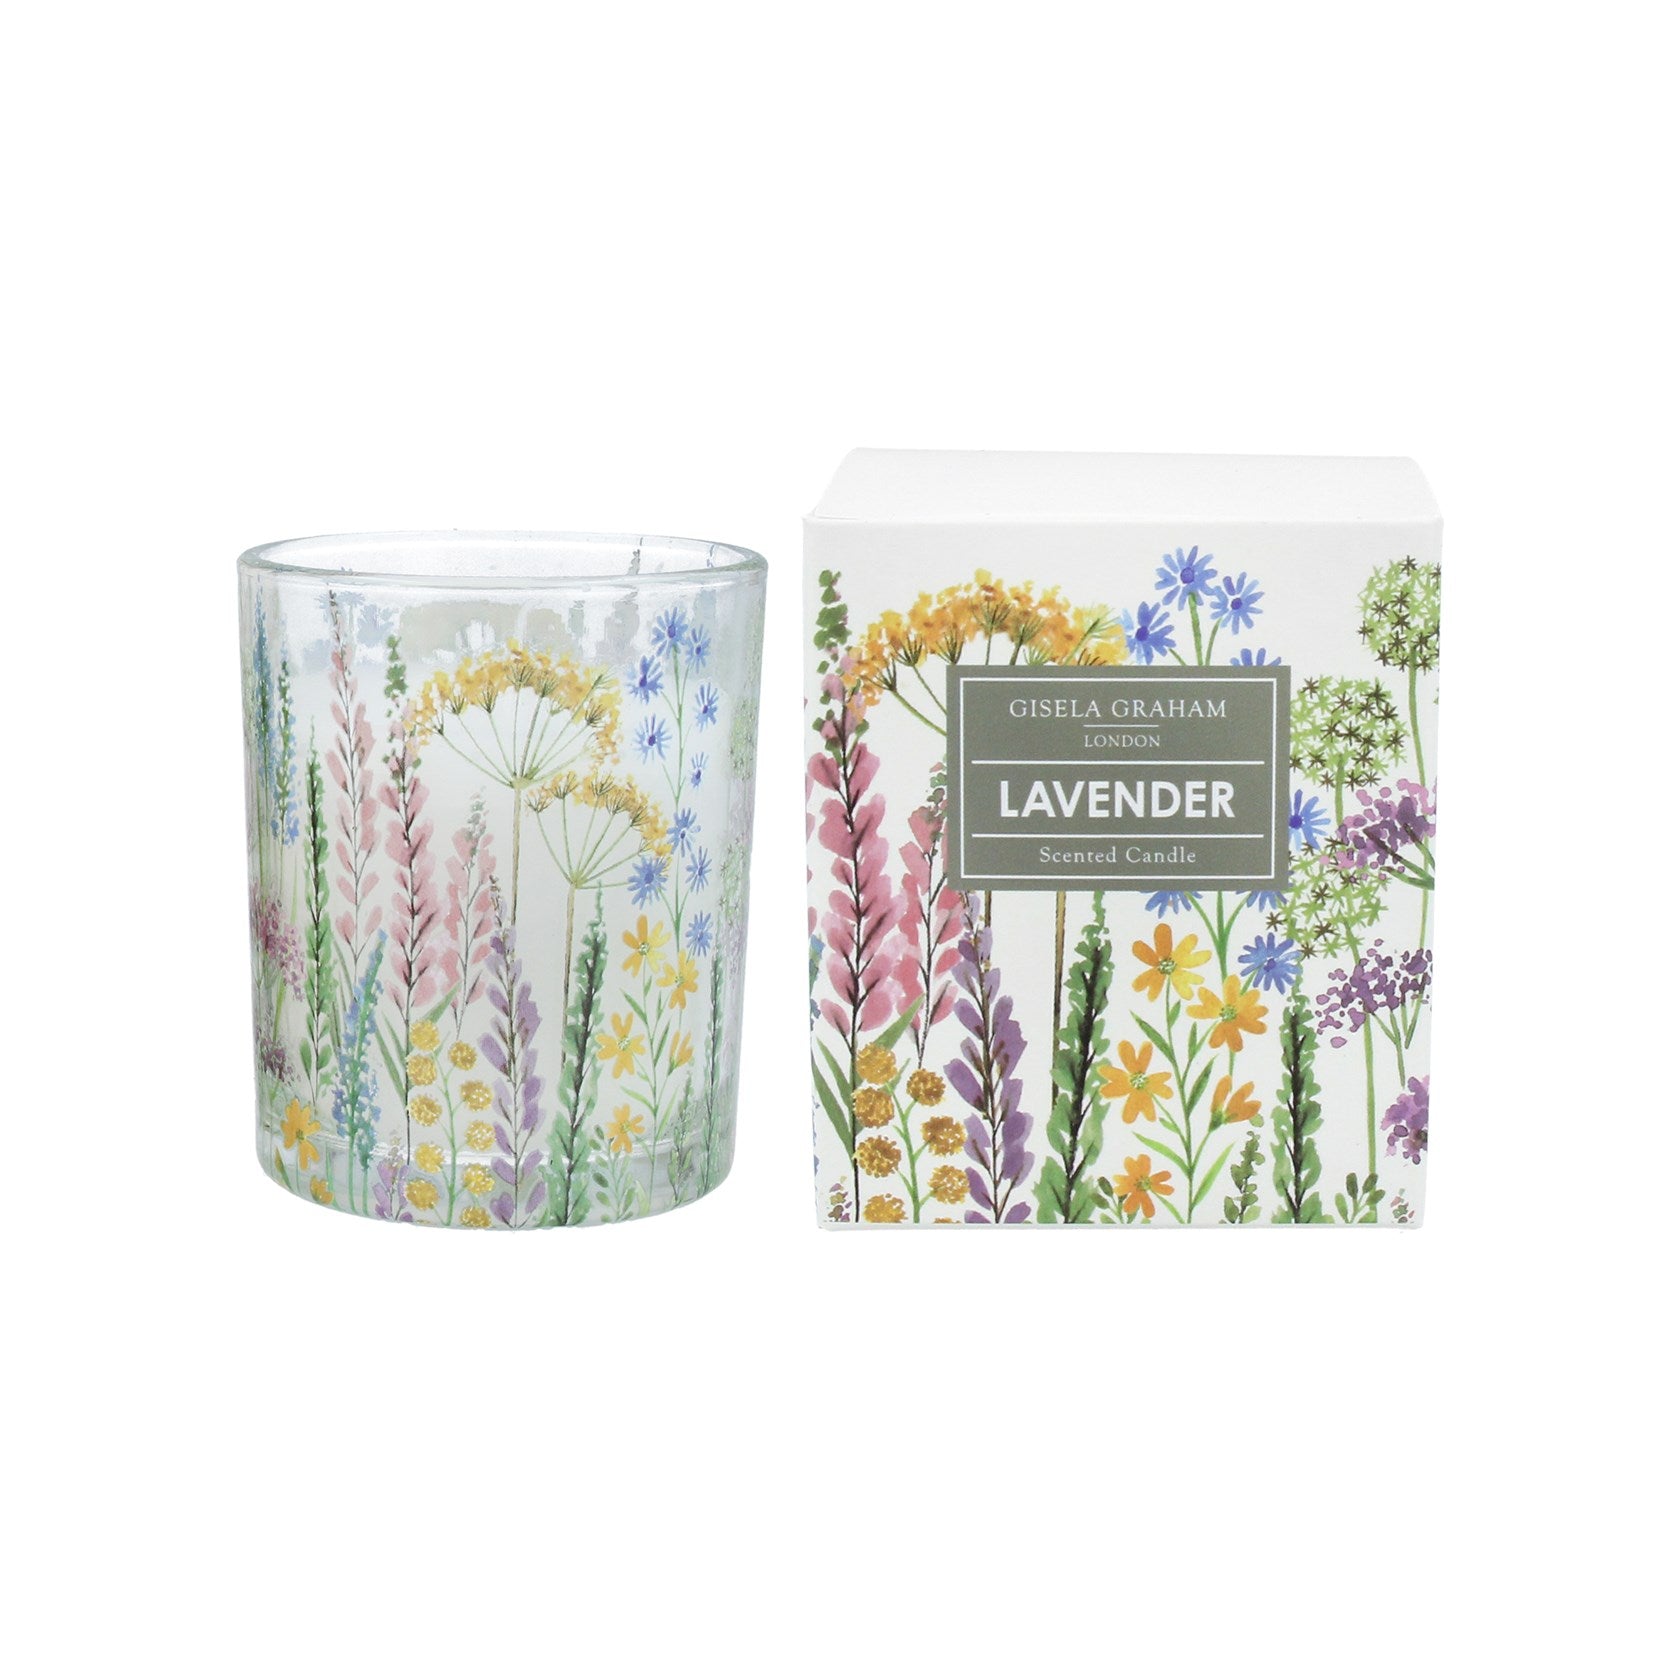 Spring meadow boxed candle